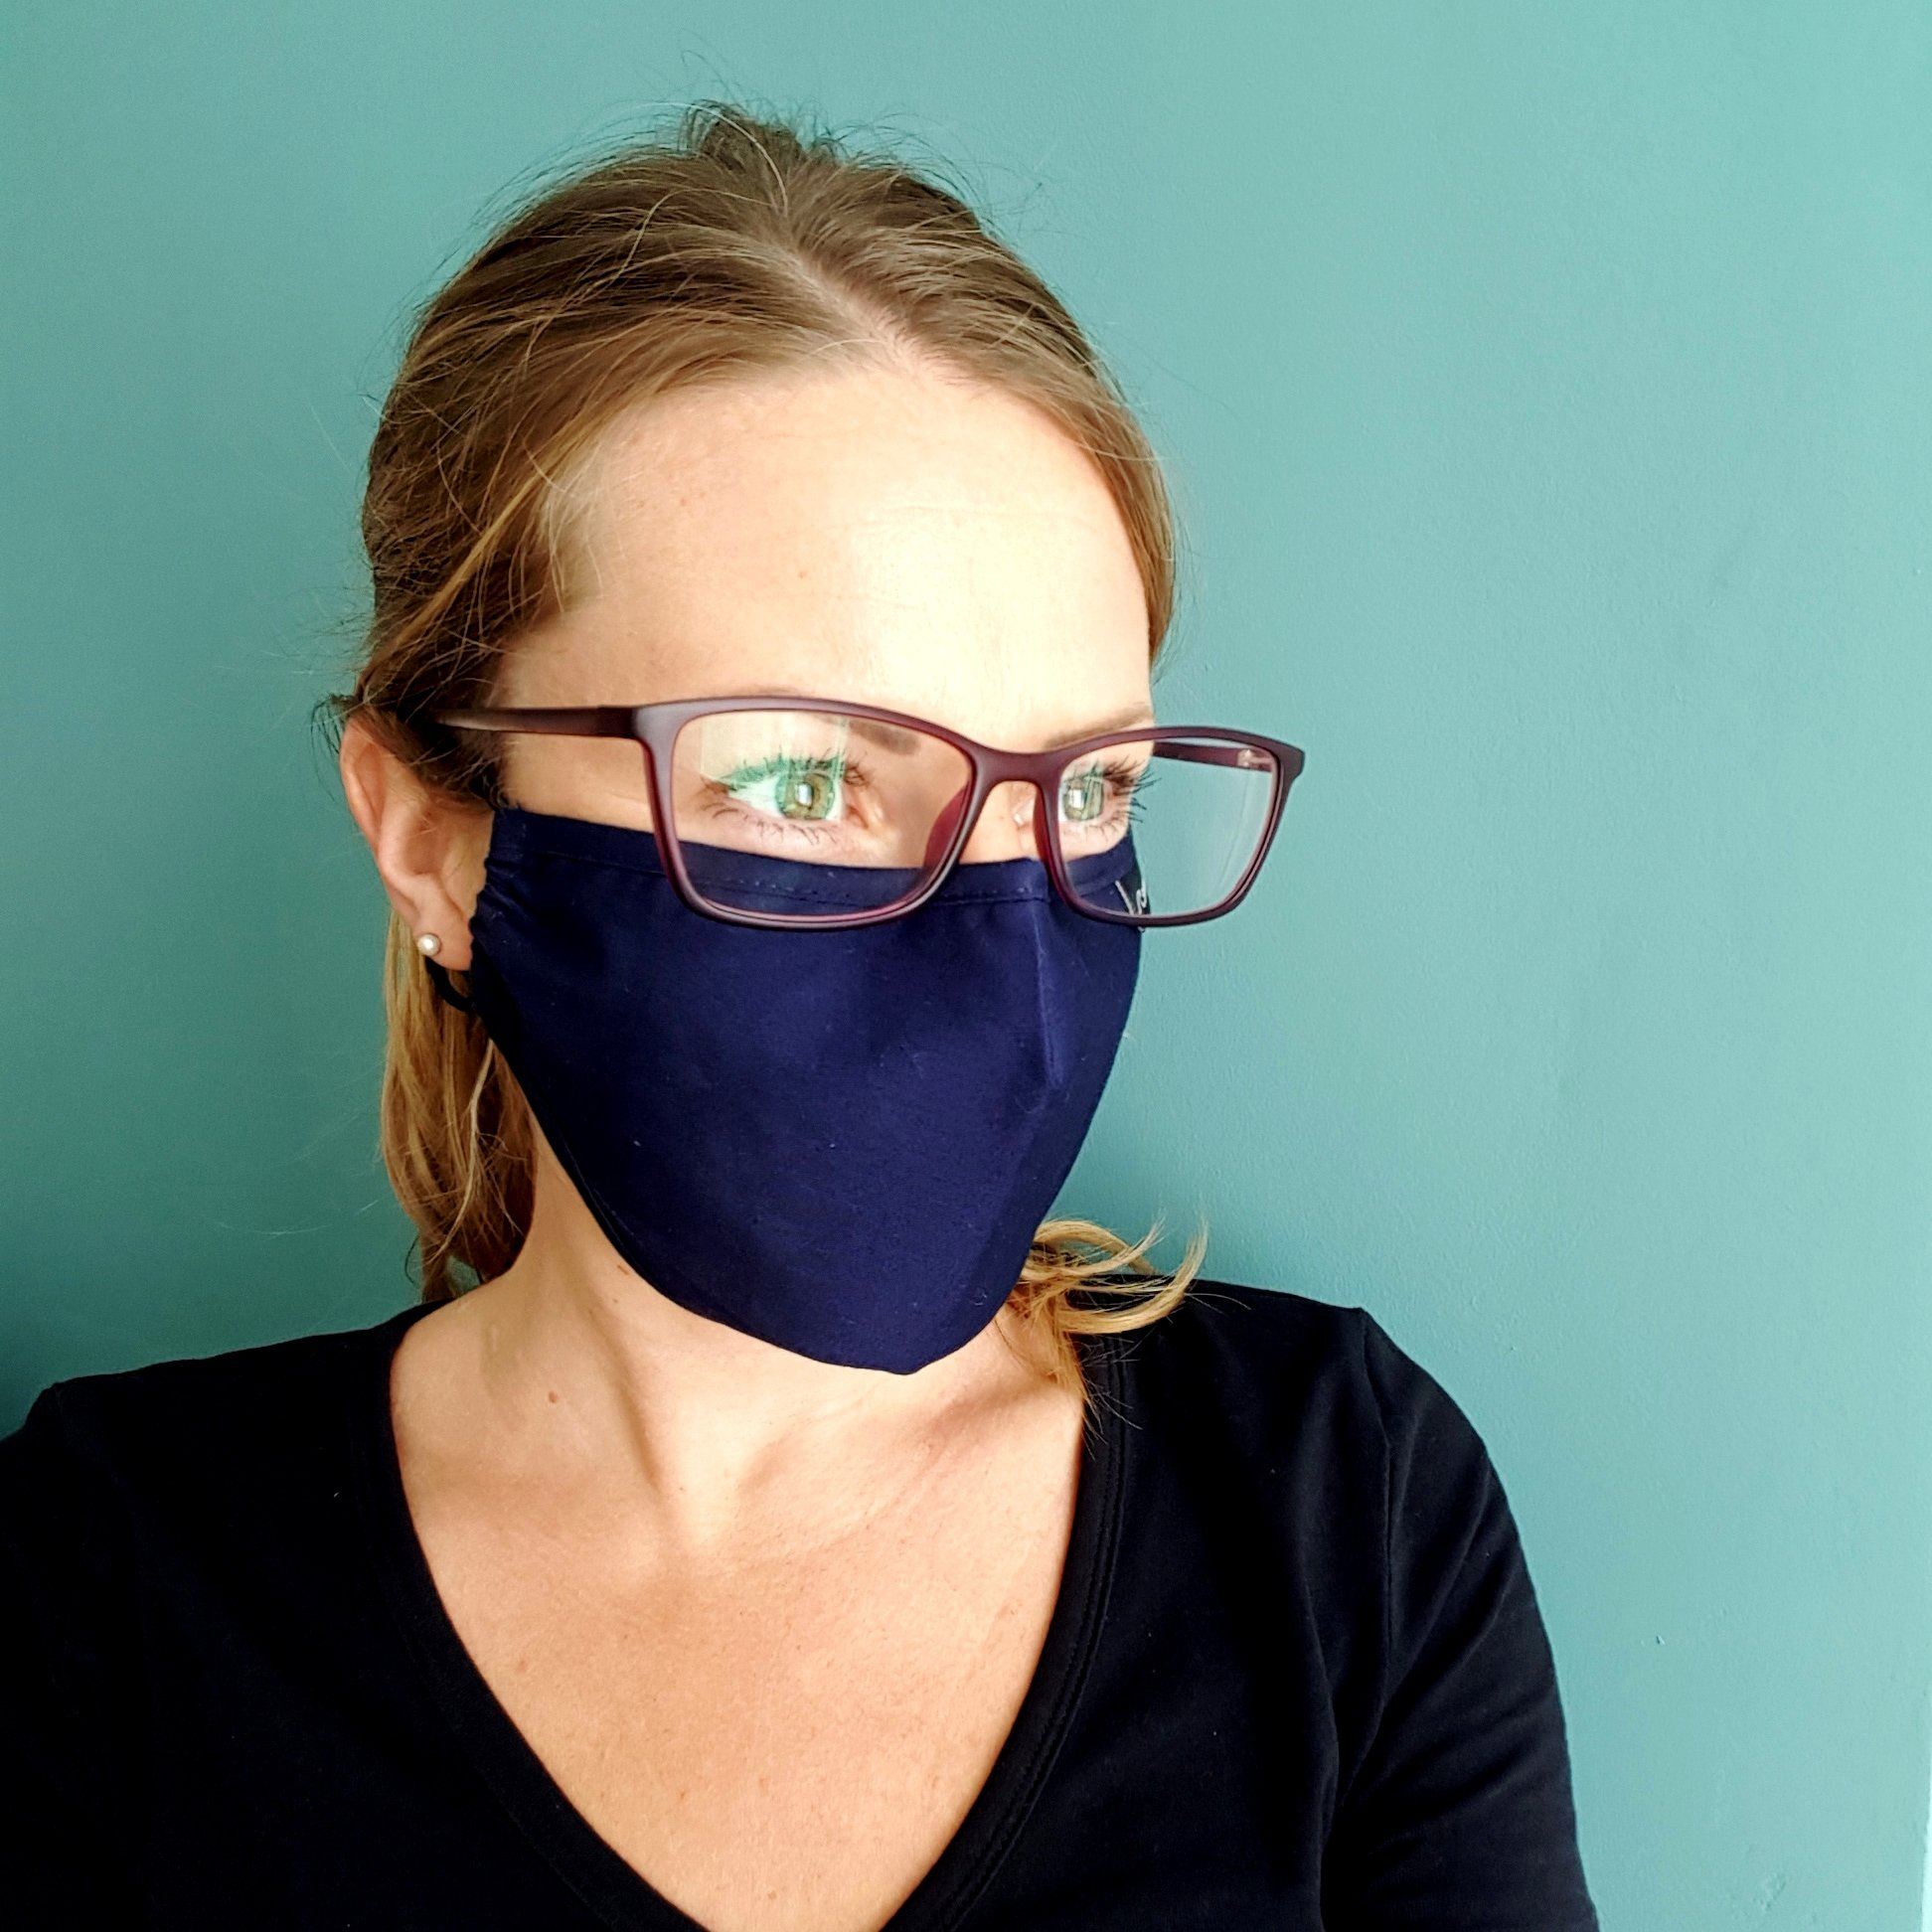 1 Simple Trick -How To Stop Glasses Fogging When Wearing a Face Mask